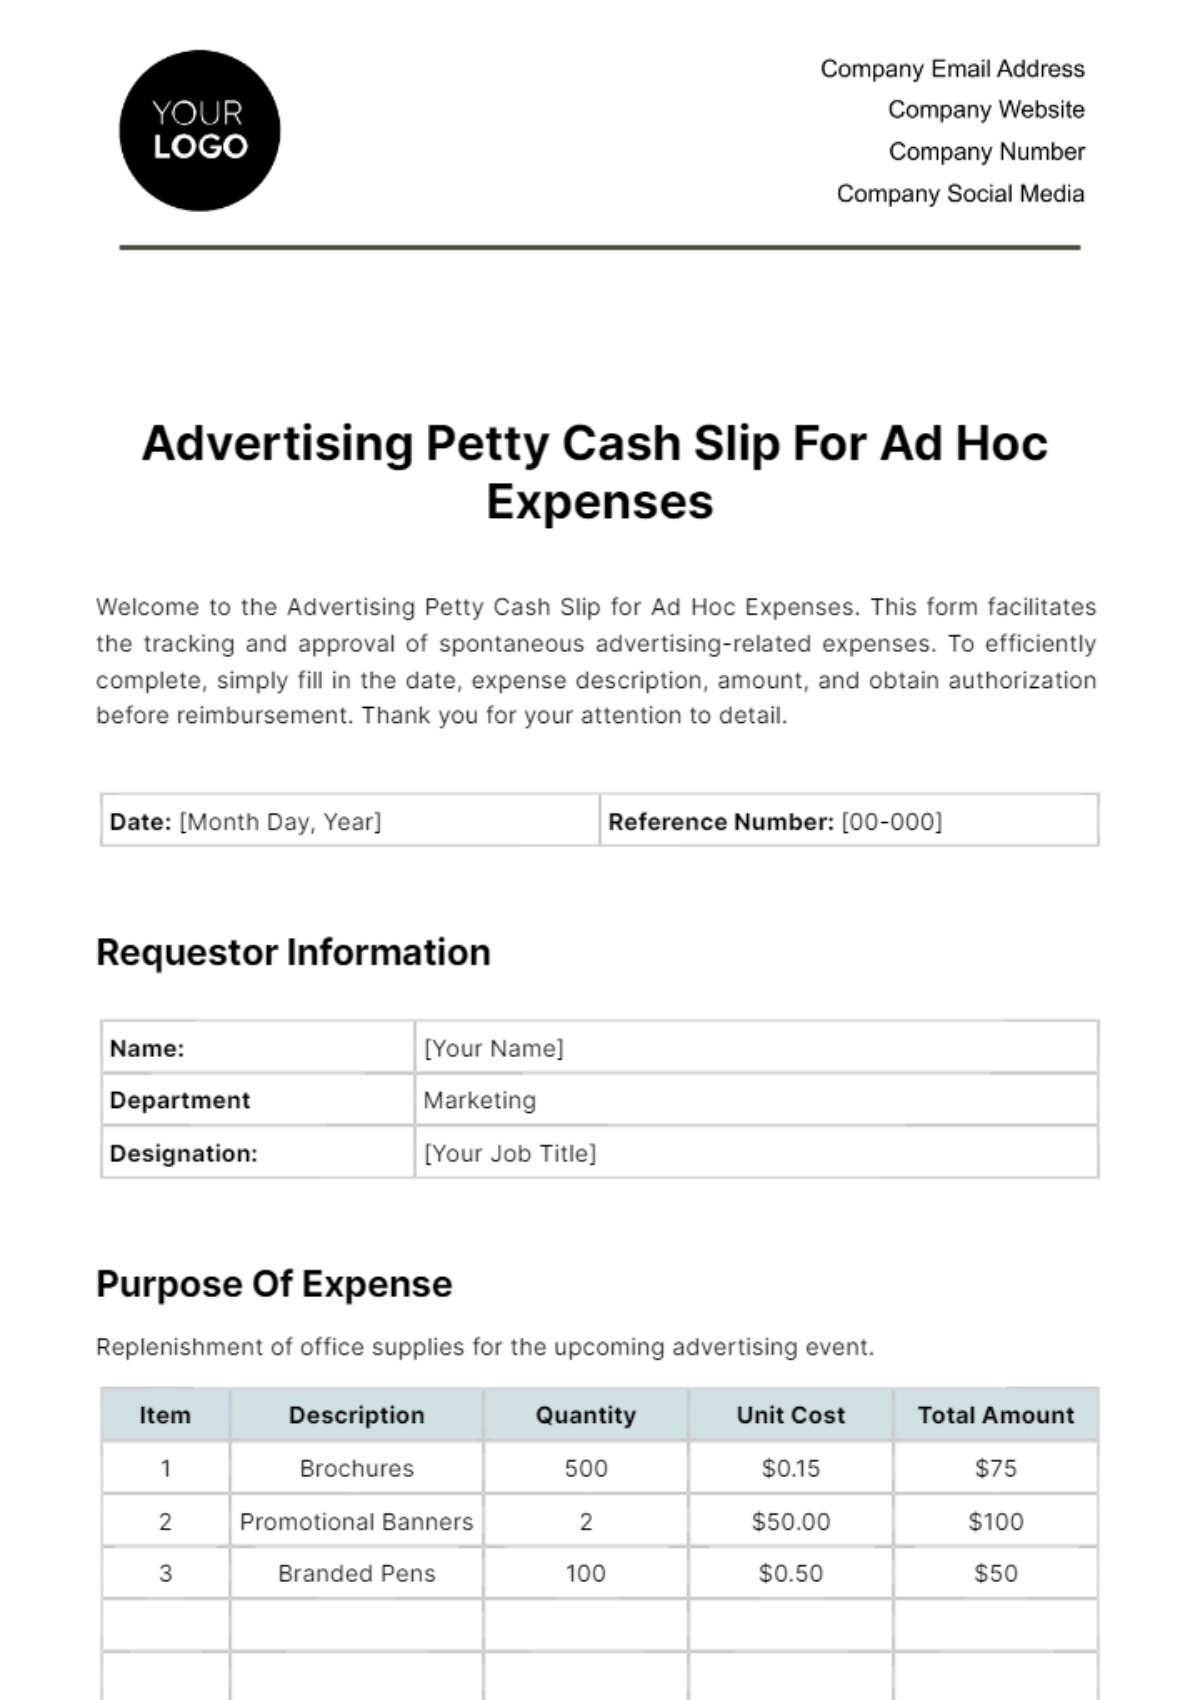 Free Advertising Petty Cash Slip for Ad Hoc Expenses Template